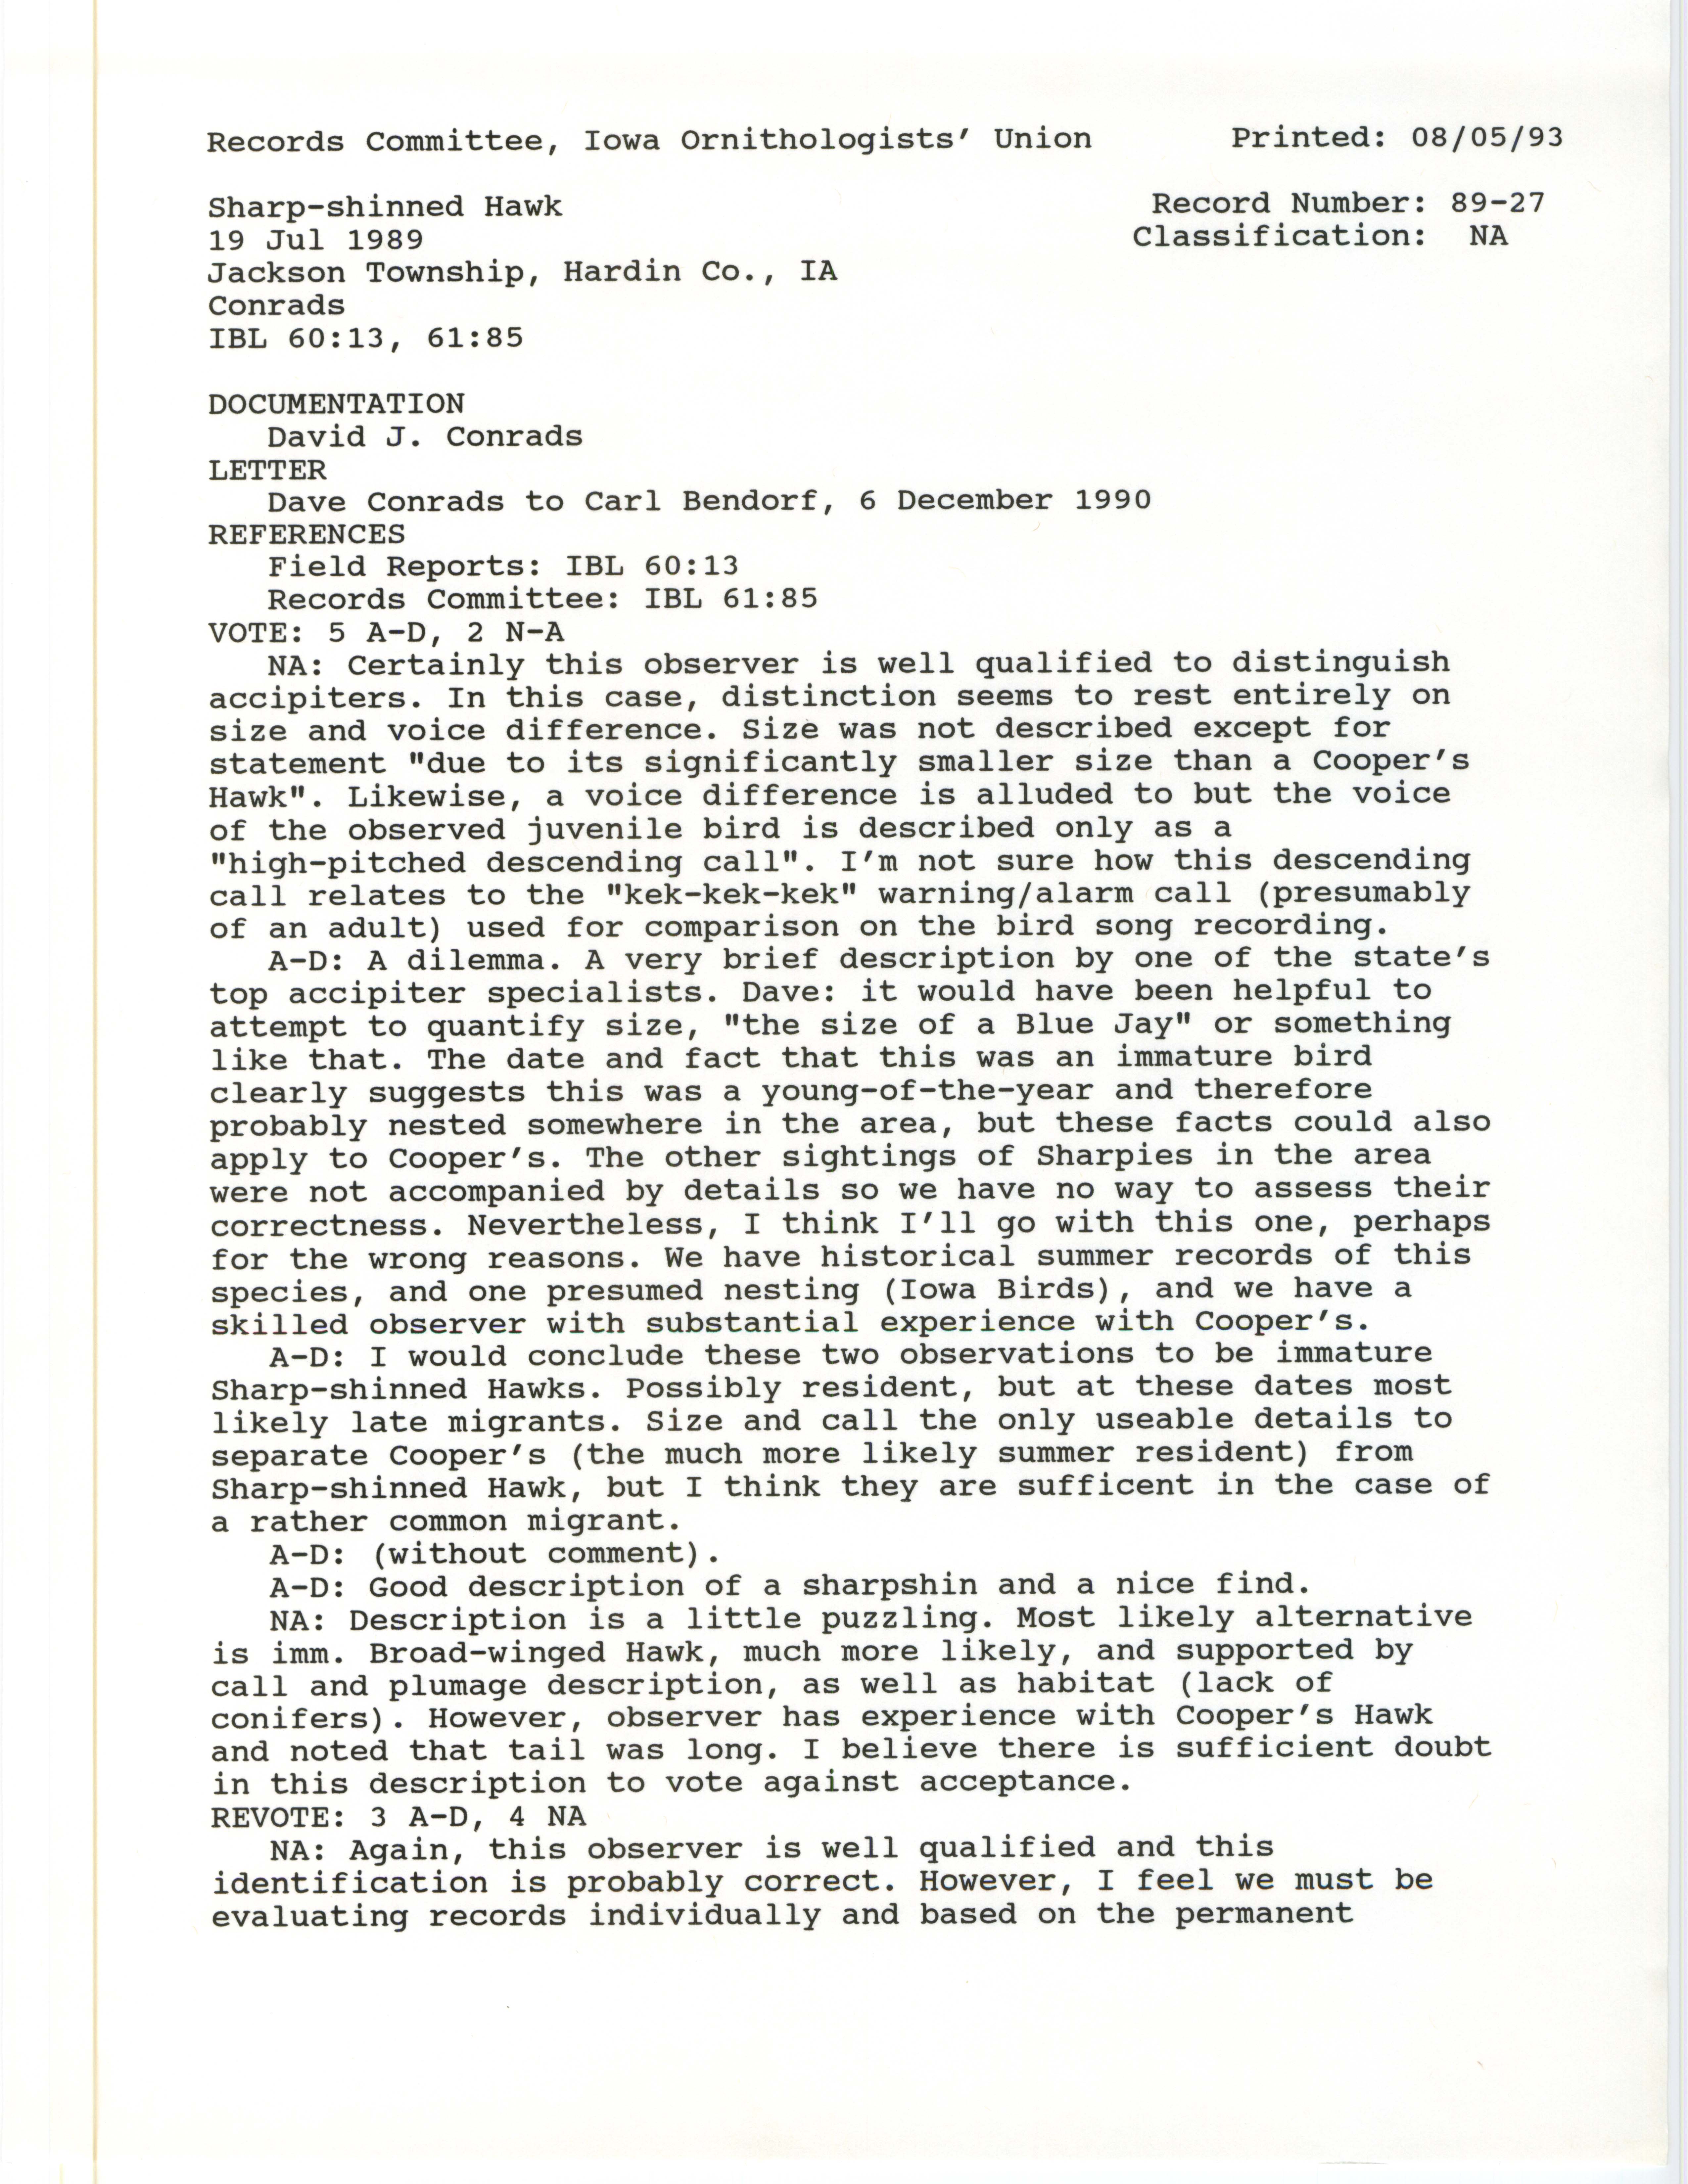 Records Committee review for rare bird sighting of Sharp-shinned Hawk at Jackson Township, 1989